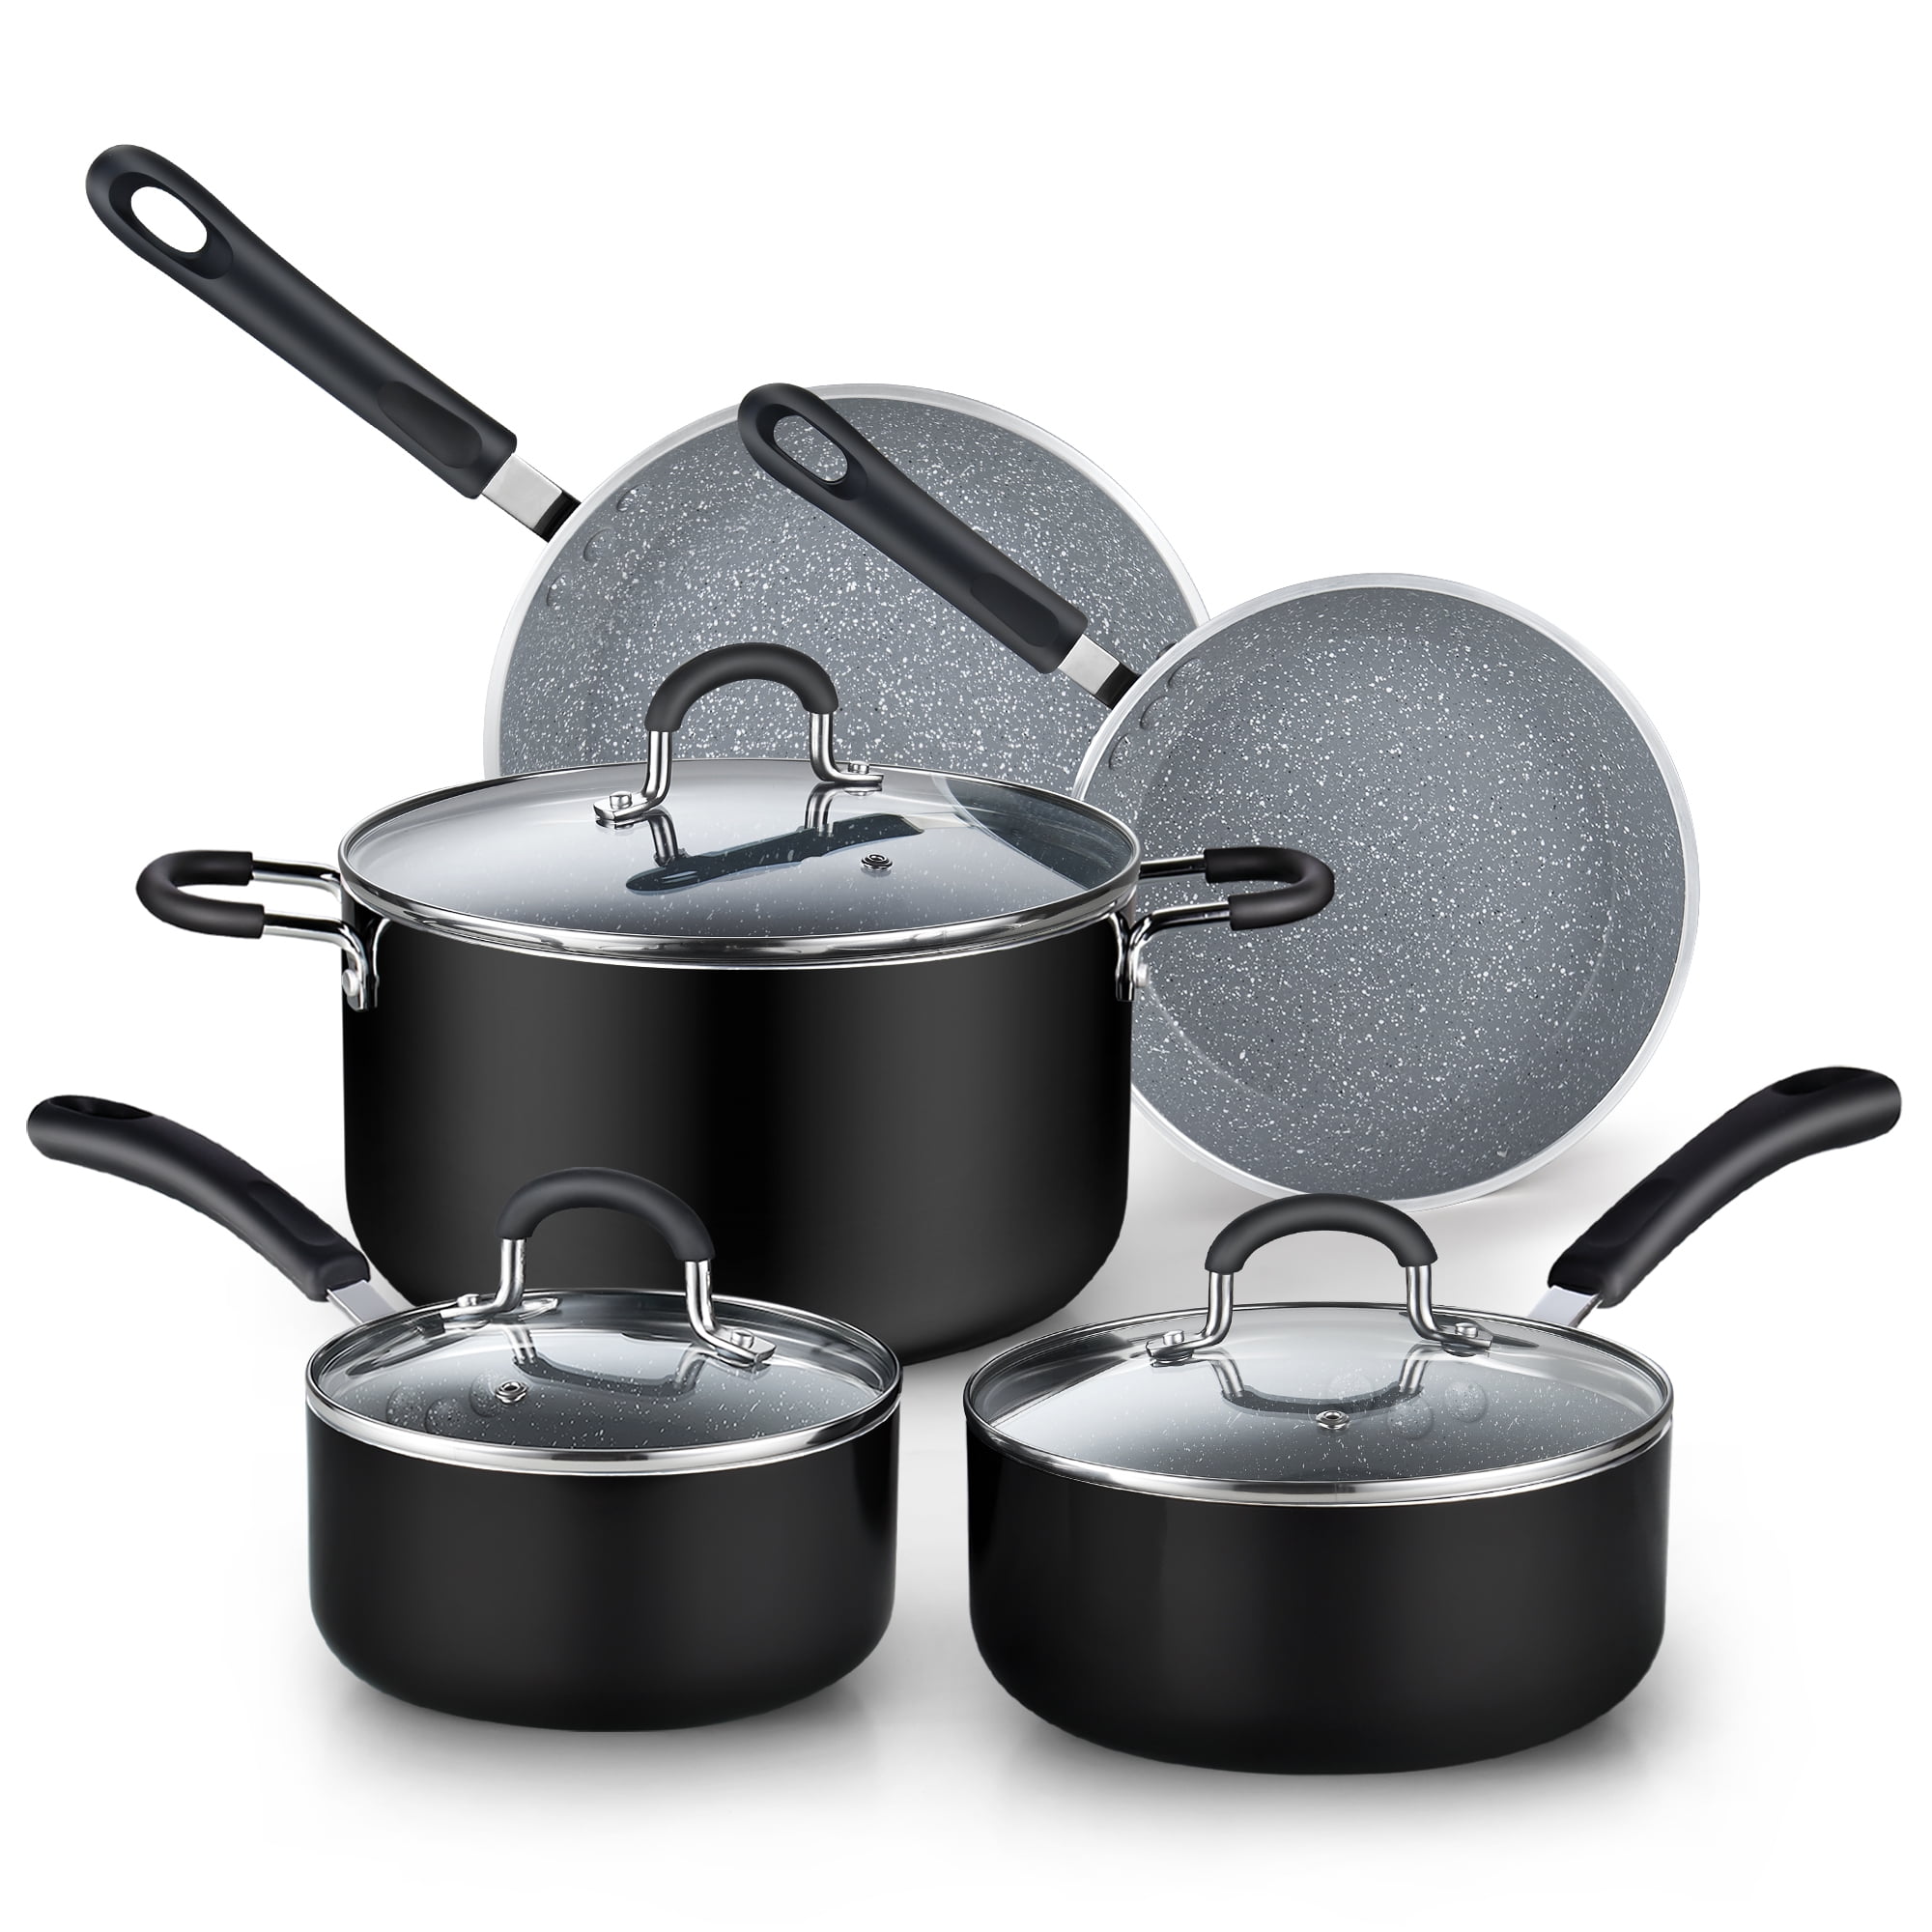 Vkoocy pot and pan set with removable handle, Nonstick Cookware Set  Detachable Handle, Induction Kitchen Camping Stackable Pots Pans,  Dishwasher/Oven